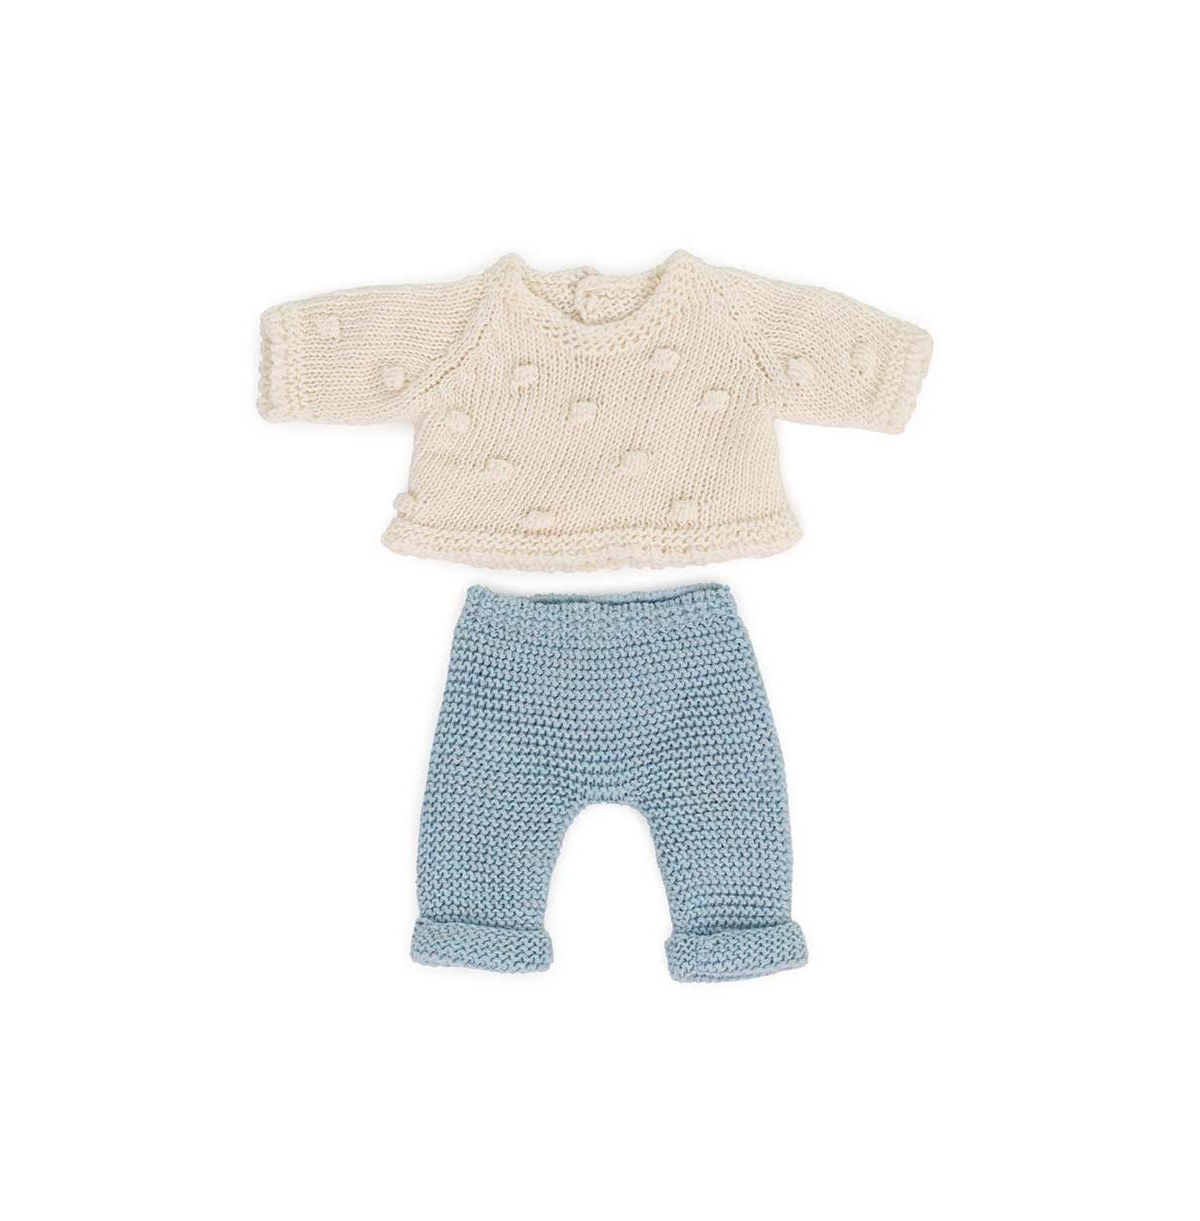 Miniland Kids' Knitted Doll Outfit 8.25" In Multi